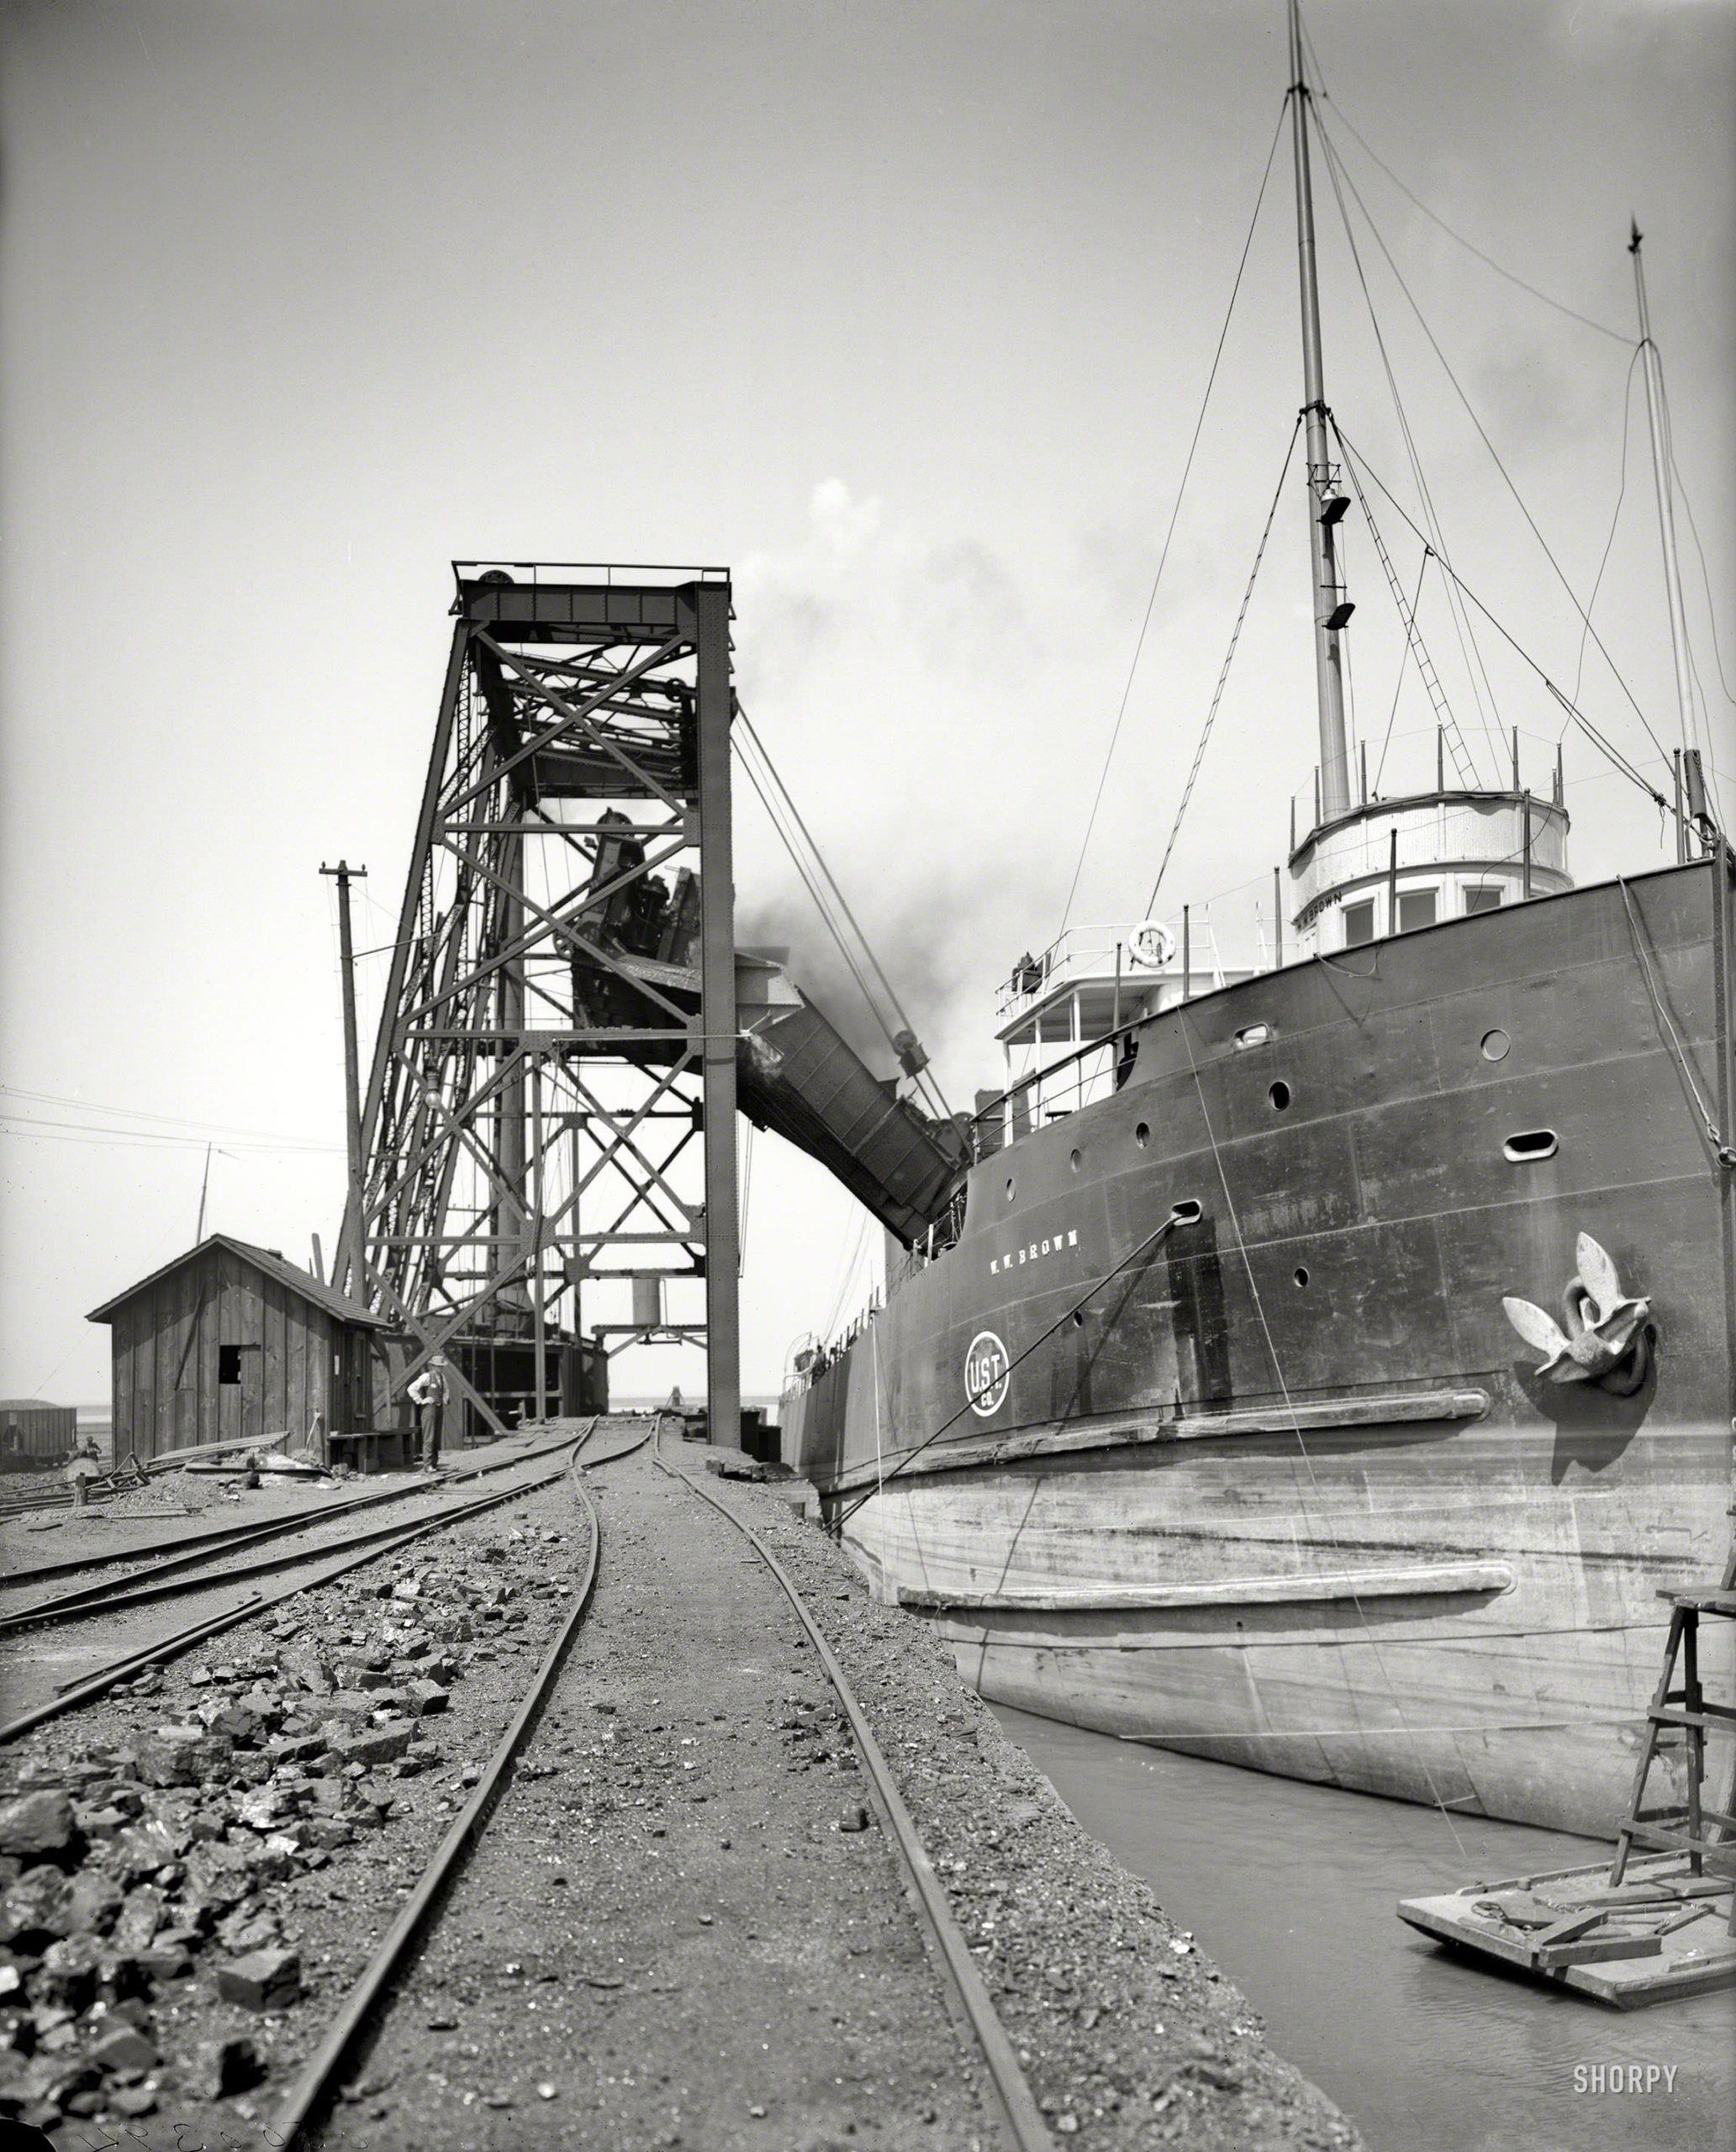 Freighter W.W. Brown taking on coal, Cleveland circa 1910